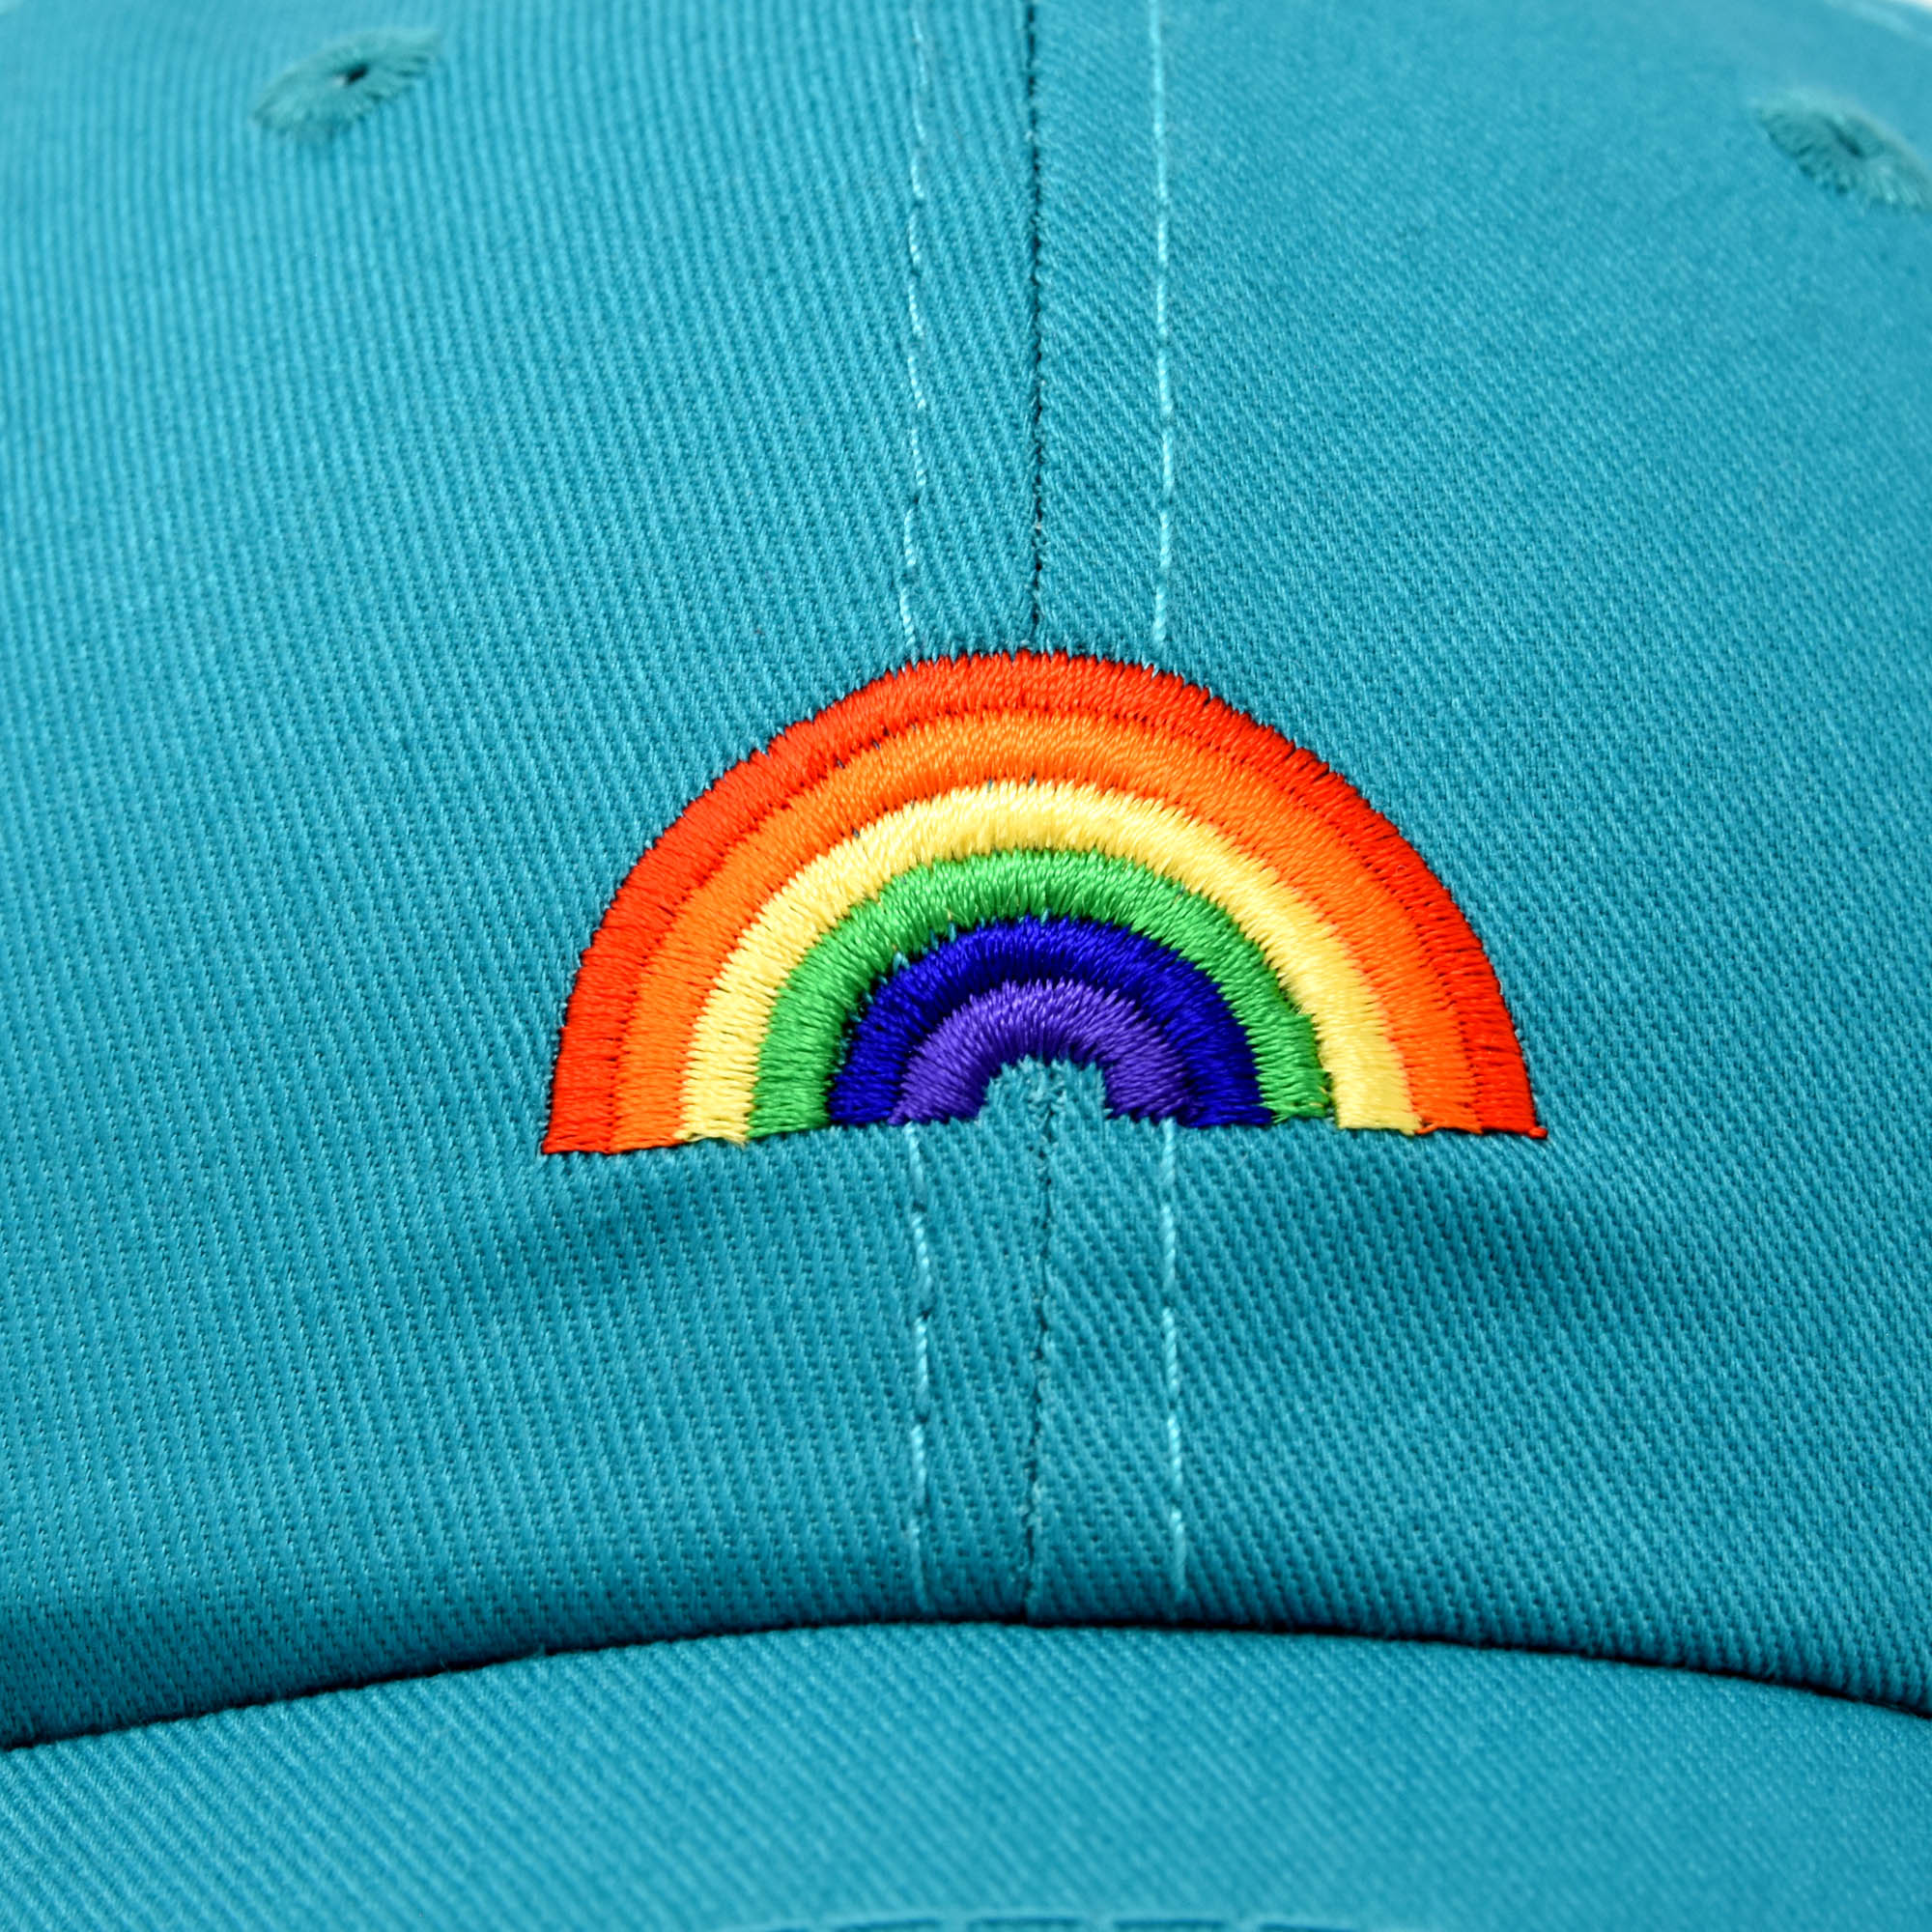 DALIX Rainbow Baseball Cap Womens Hats Cute Hat Soft Cotton Caps in Teal - image 5 of 7